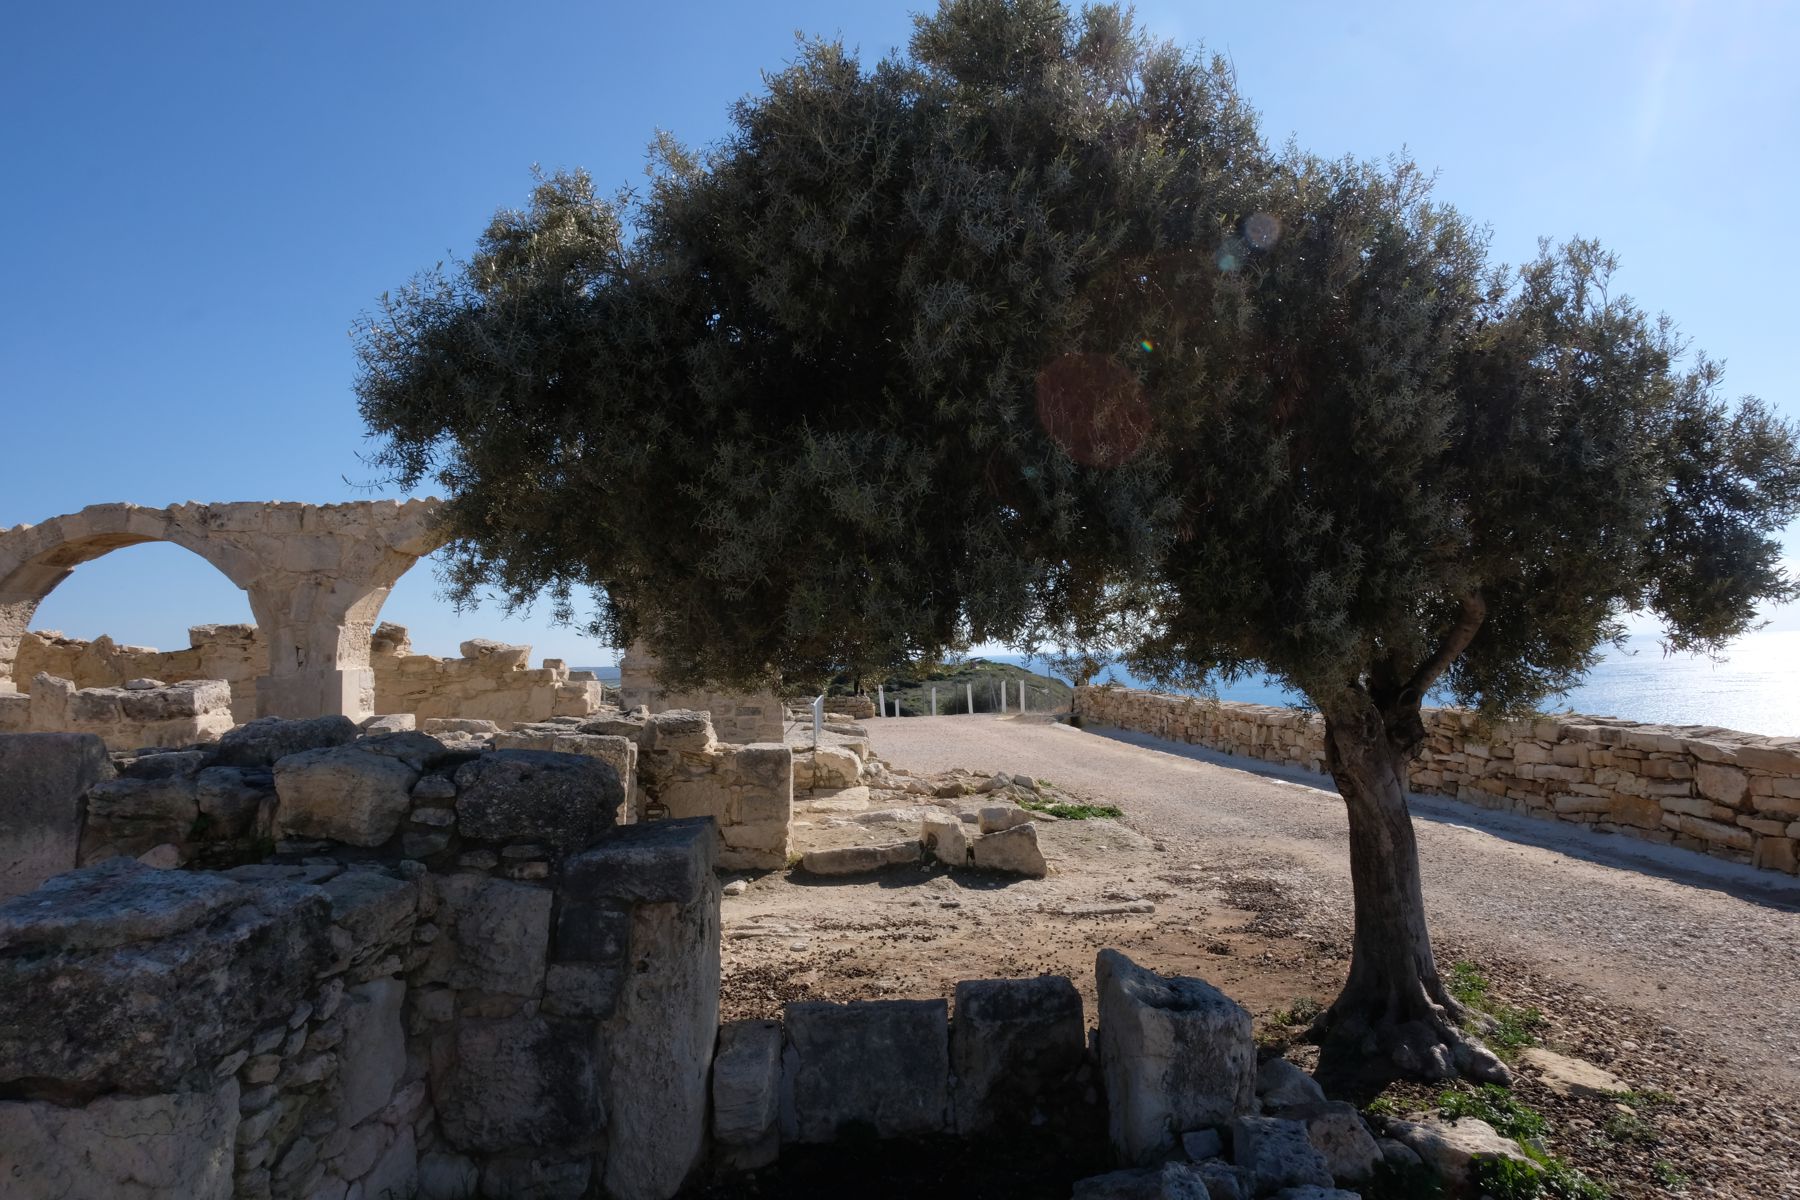 Ruins and tree in Kato Paphos